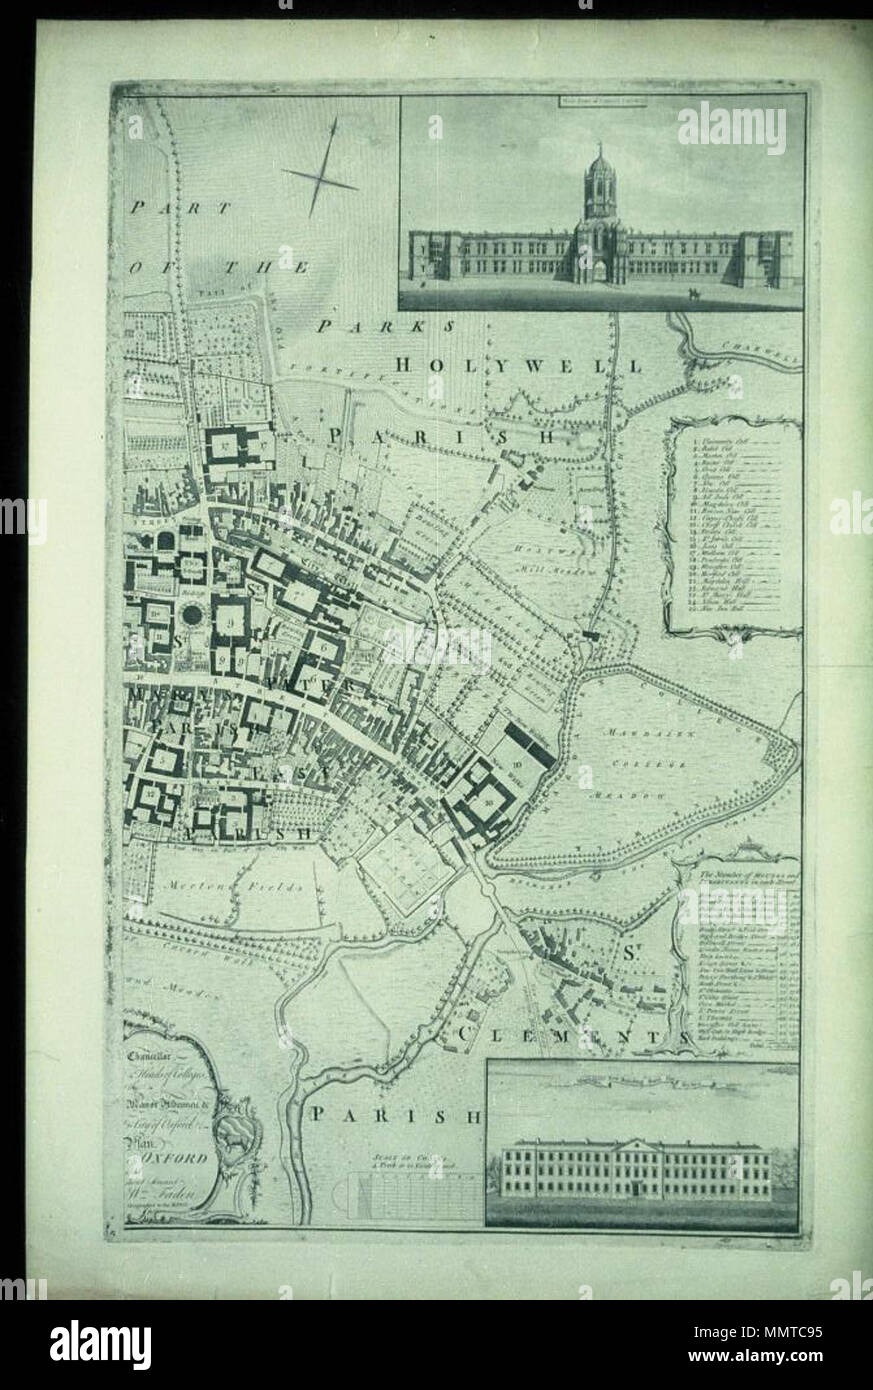 . Oxford, mid-18th century, with many medieval features. Surveyed by Isaac Taylor, engraved by George Anderton and published by William Jackson. Scale c.1: 2,400; Image 2  [Plan of the University and City of Oxford]. 1751. Bodleian Libraries, Plan of the University and City of Oxford Image 2 Stock Photo